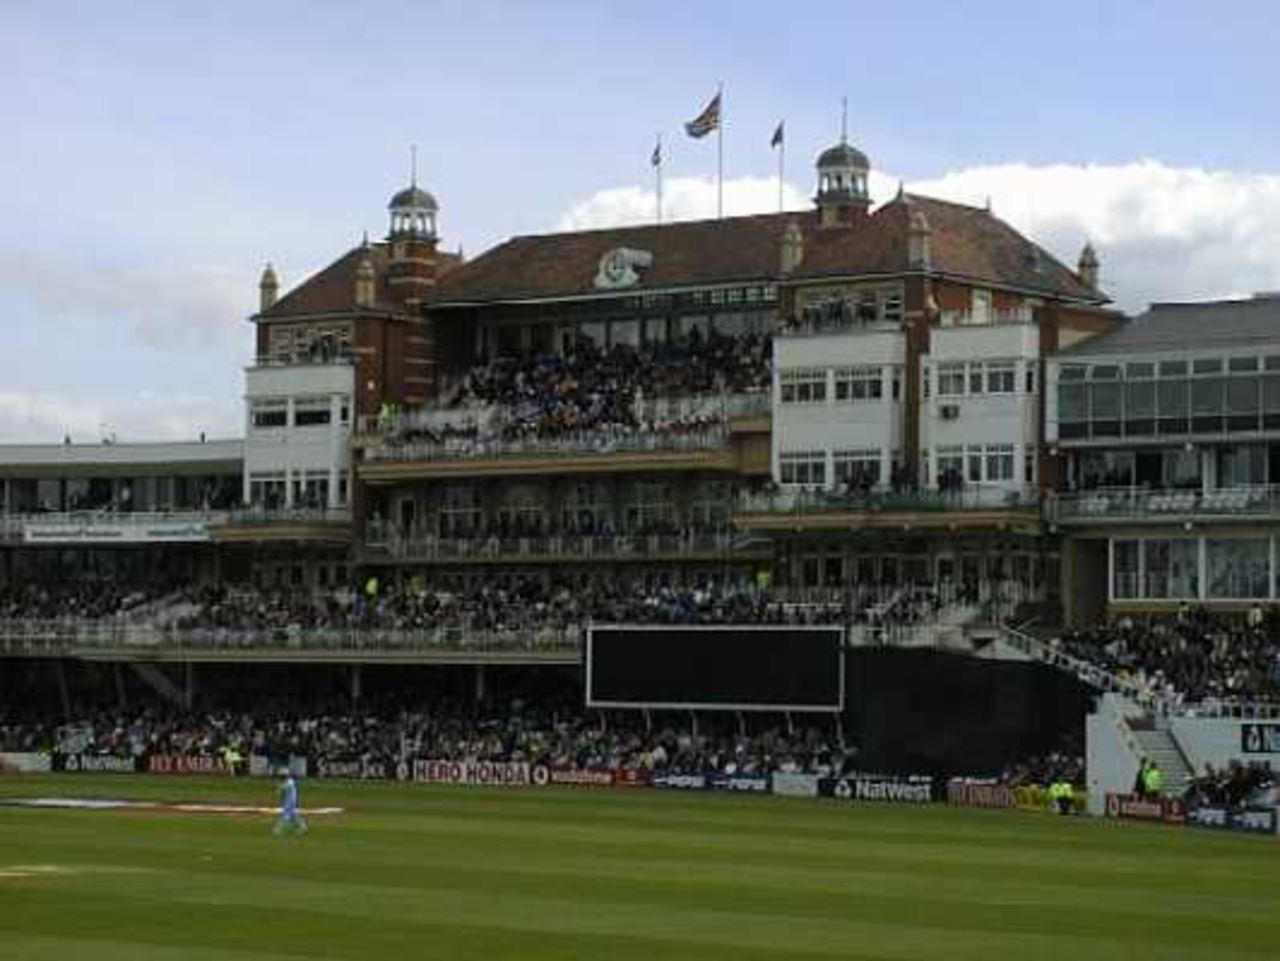 A view of the stadium at the Oval, WC99 4 June 1999